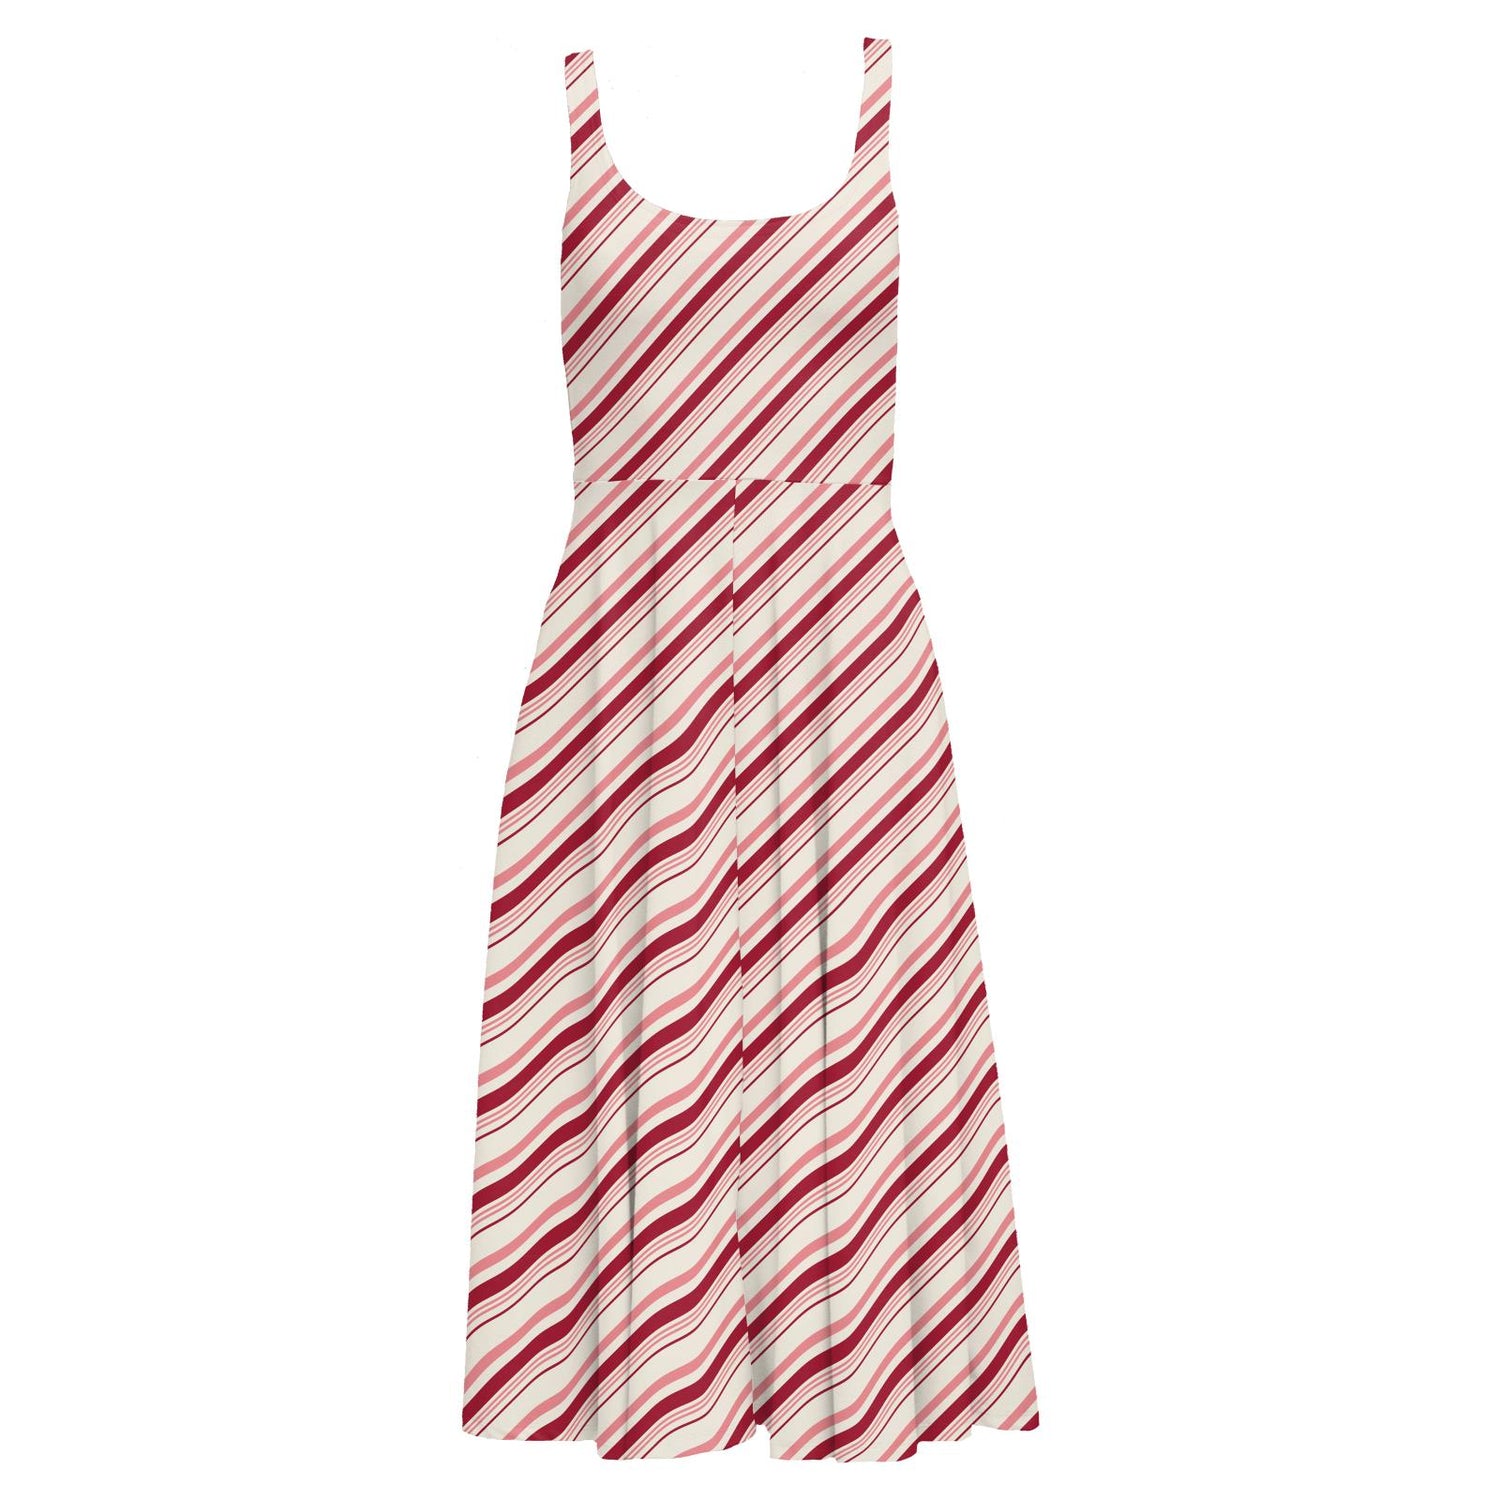 Women's Print Boardwalk Dress with Luxe Top in Strawberry Candy Cane Stripe